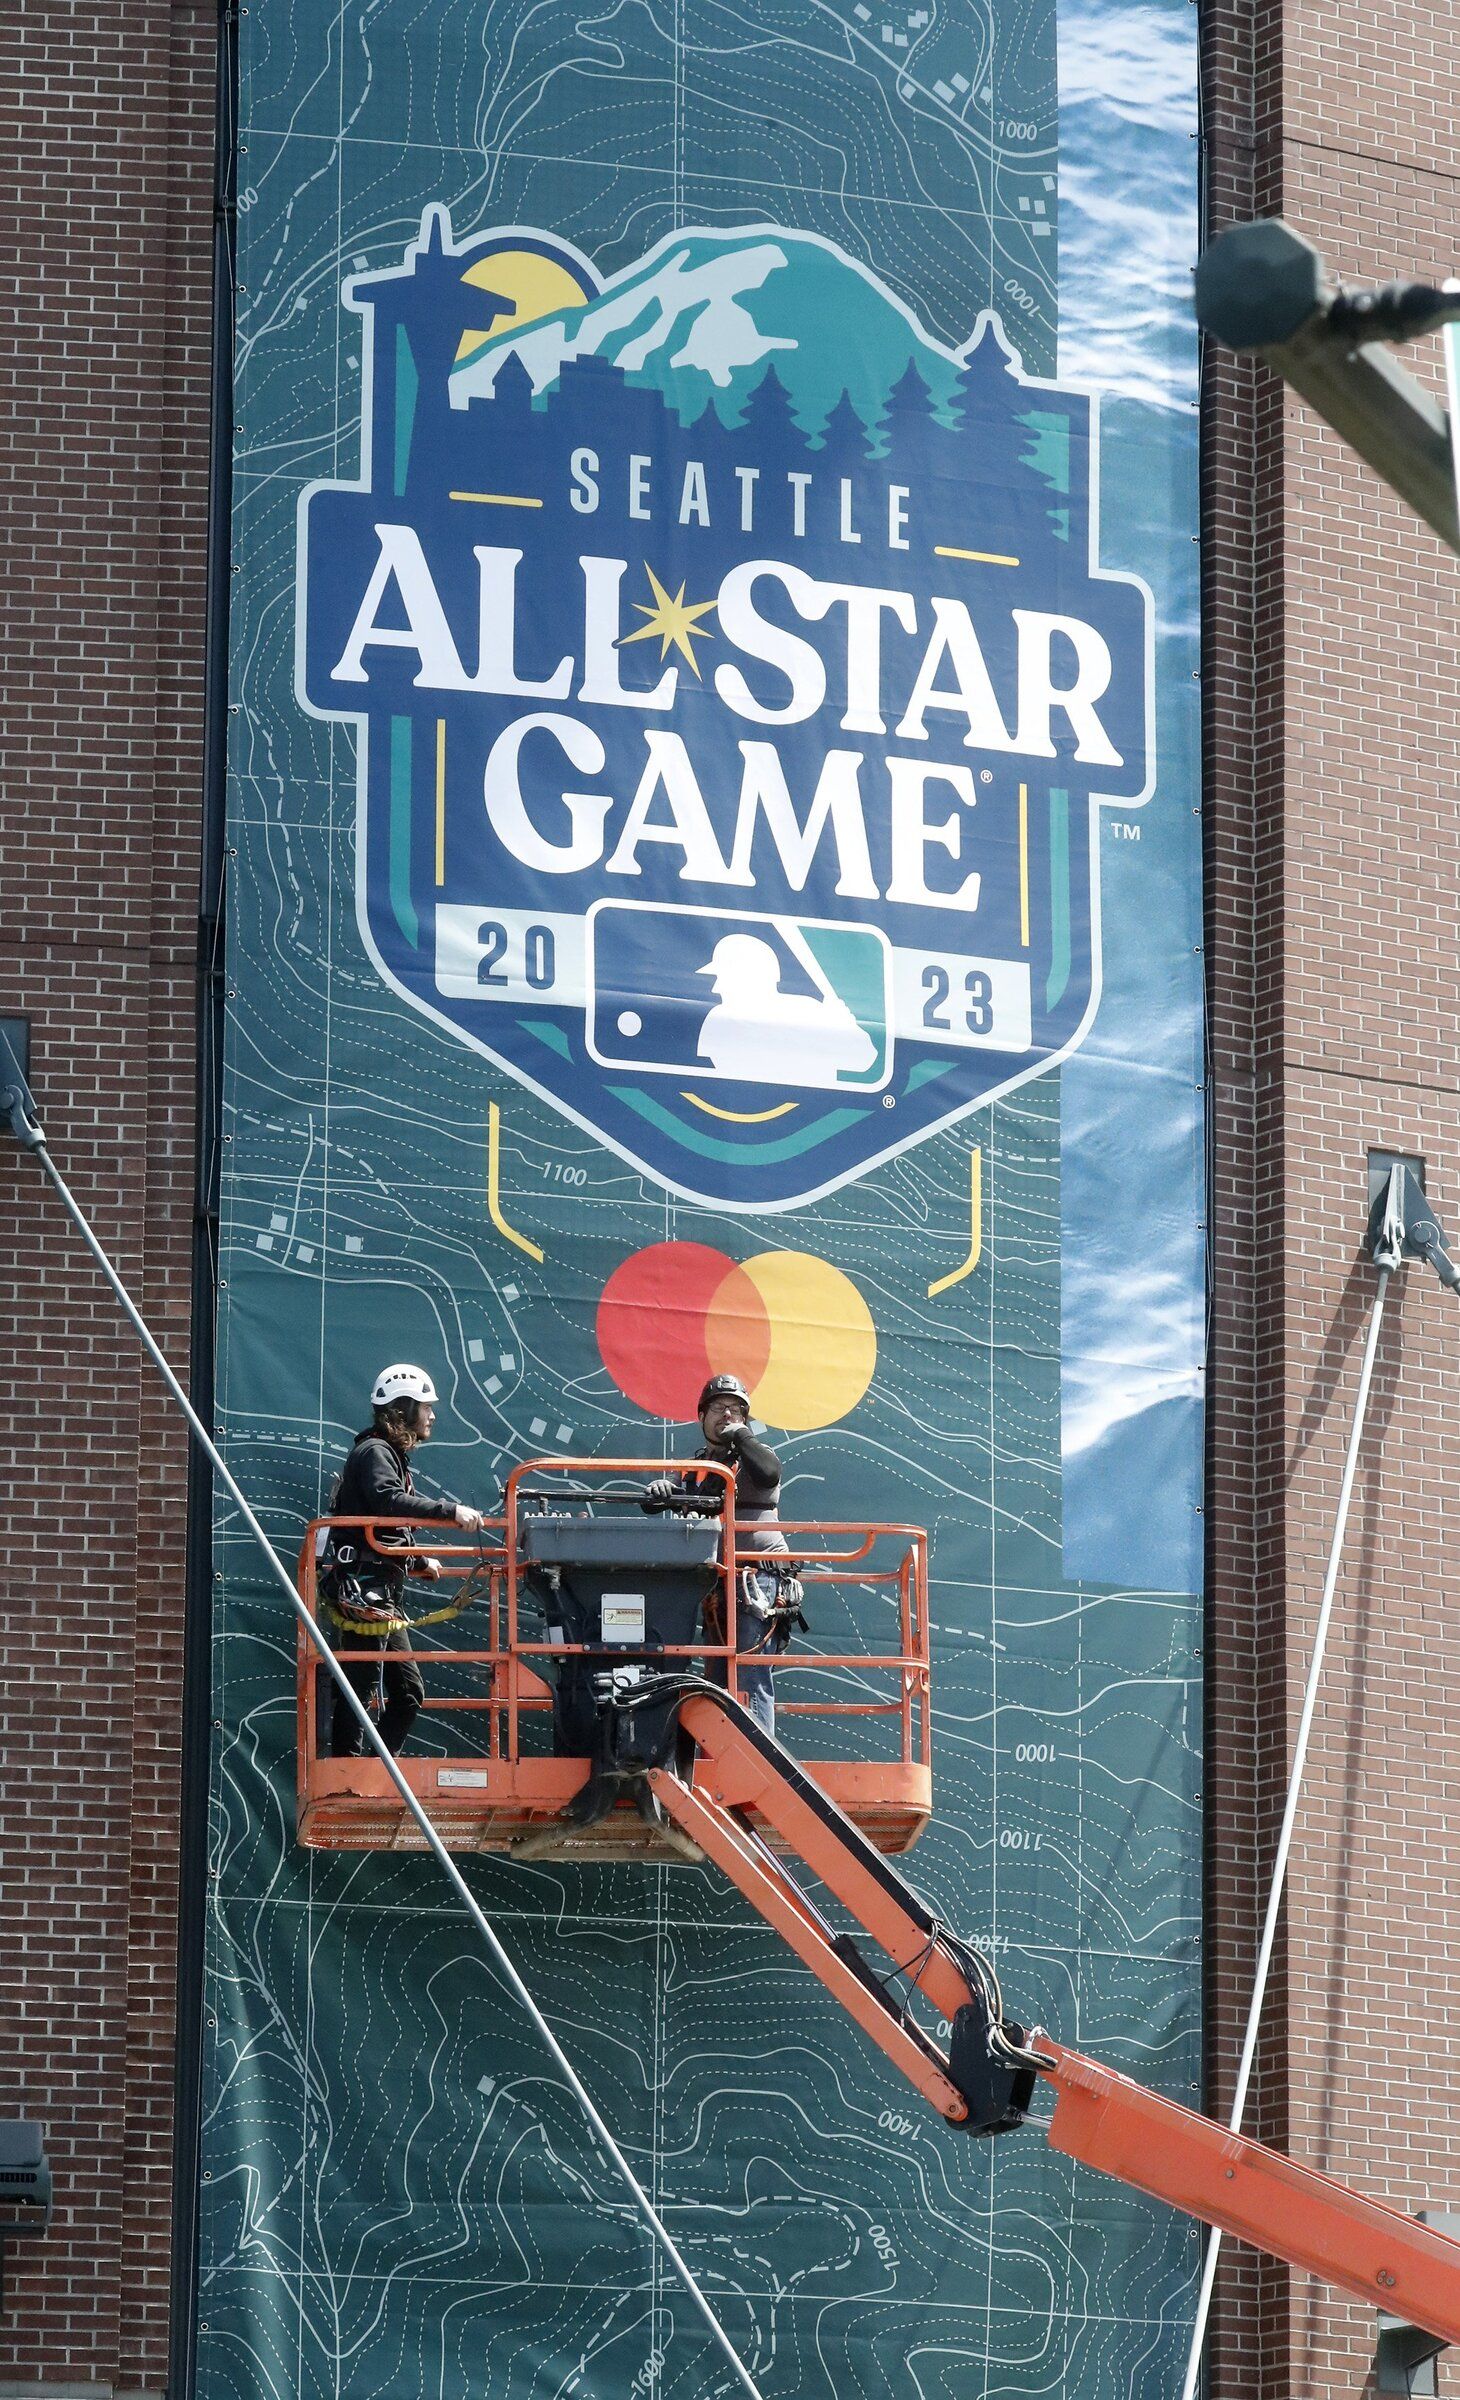 How to Watch the 2023 MLB AllStar Game Online